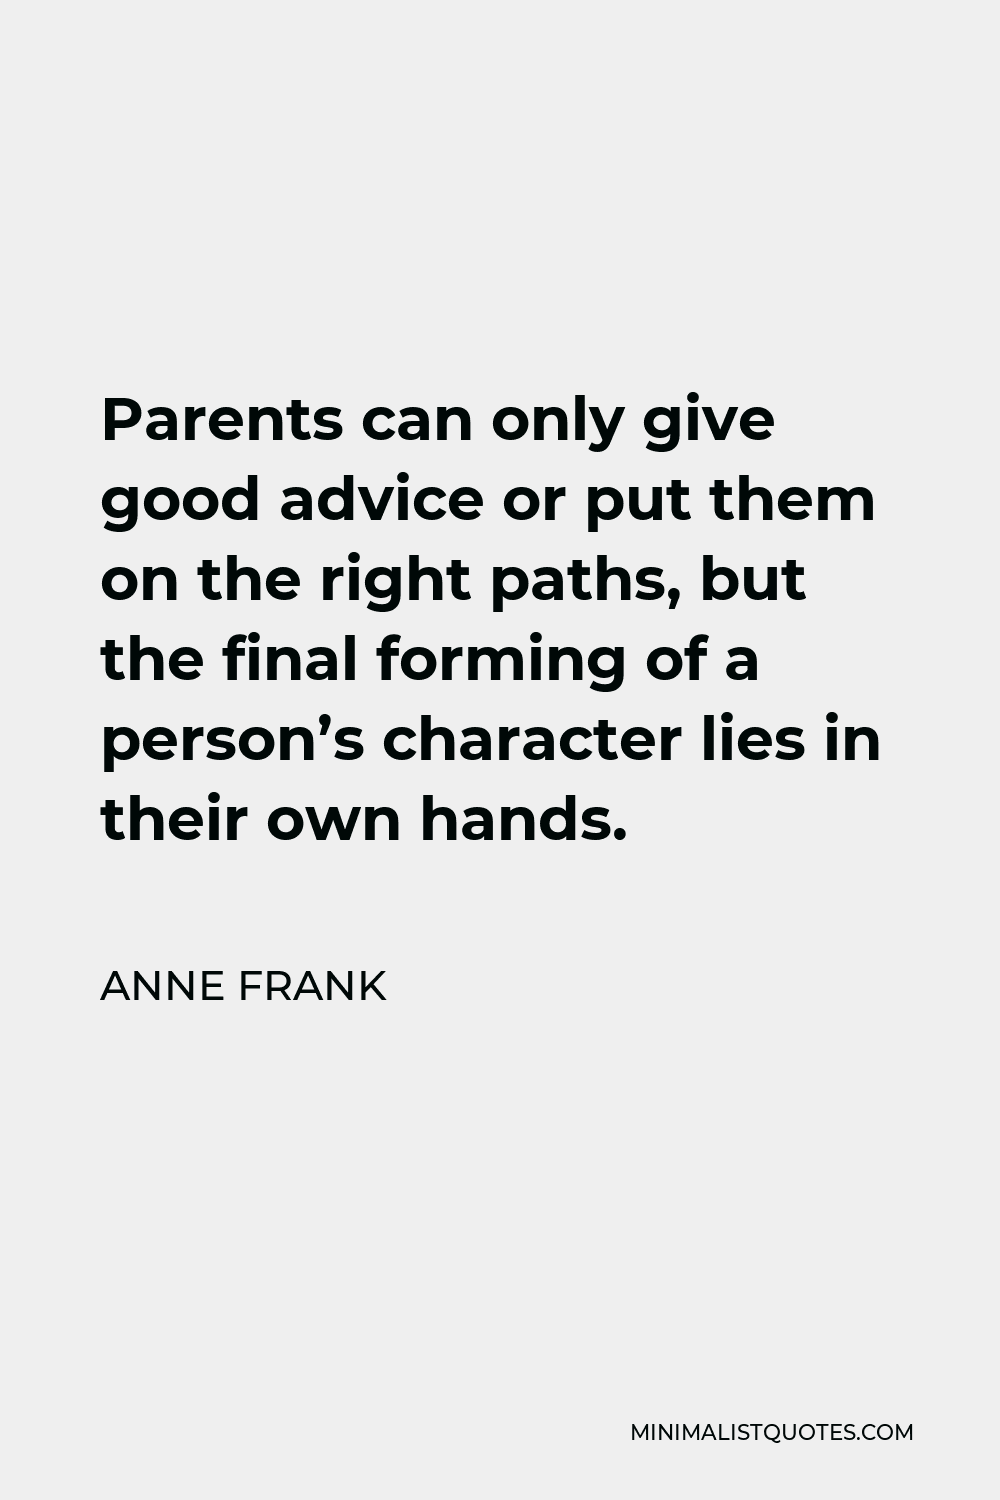 Anne Frank Quote - Parents can only give good advice or put them on the right paths, but the final forming of a person’s character lies in their own hands.